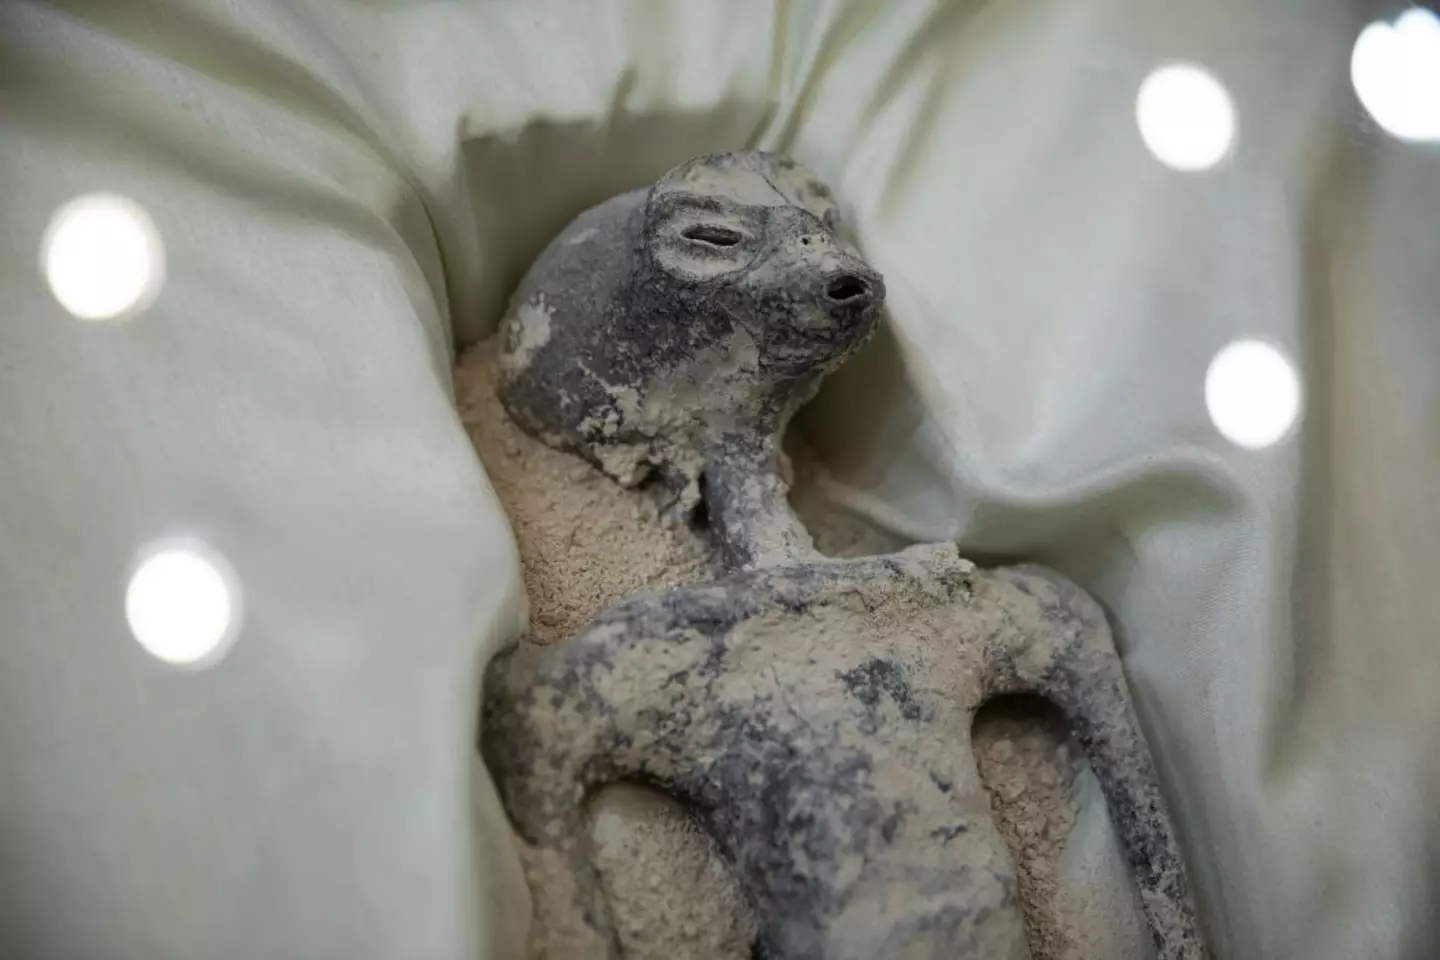 Tests done on 'alien corpses' found in Peru 'prove' they have 30 per cent DNA of 'unknown species.'